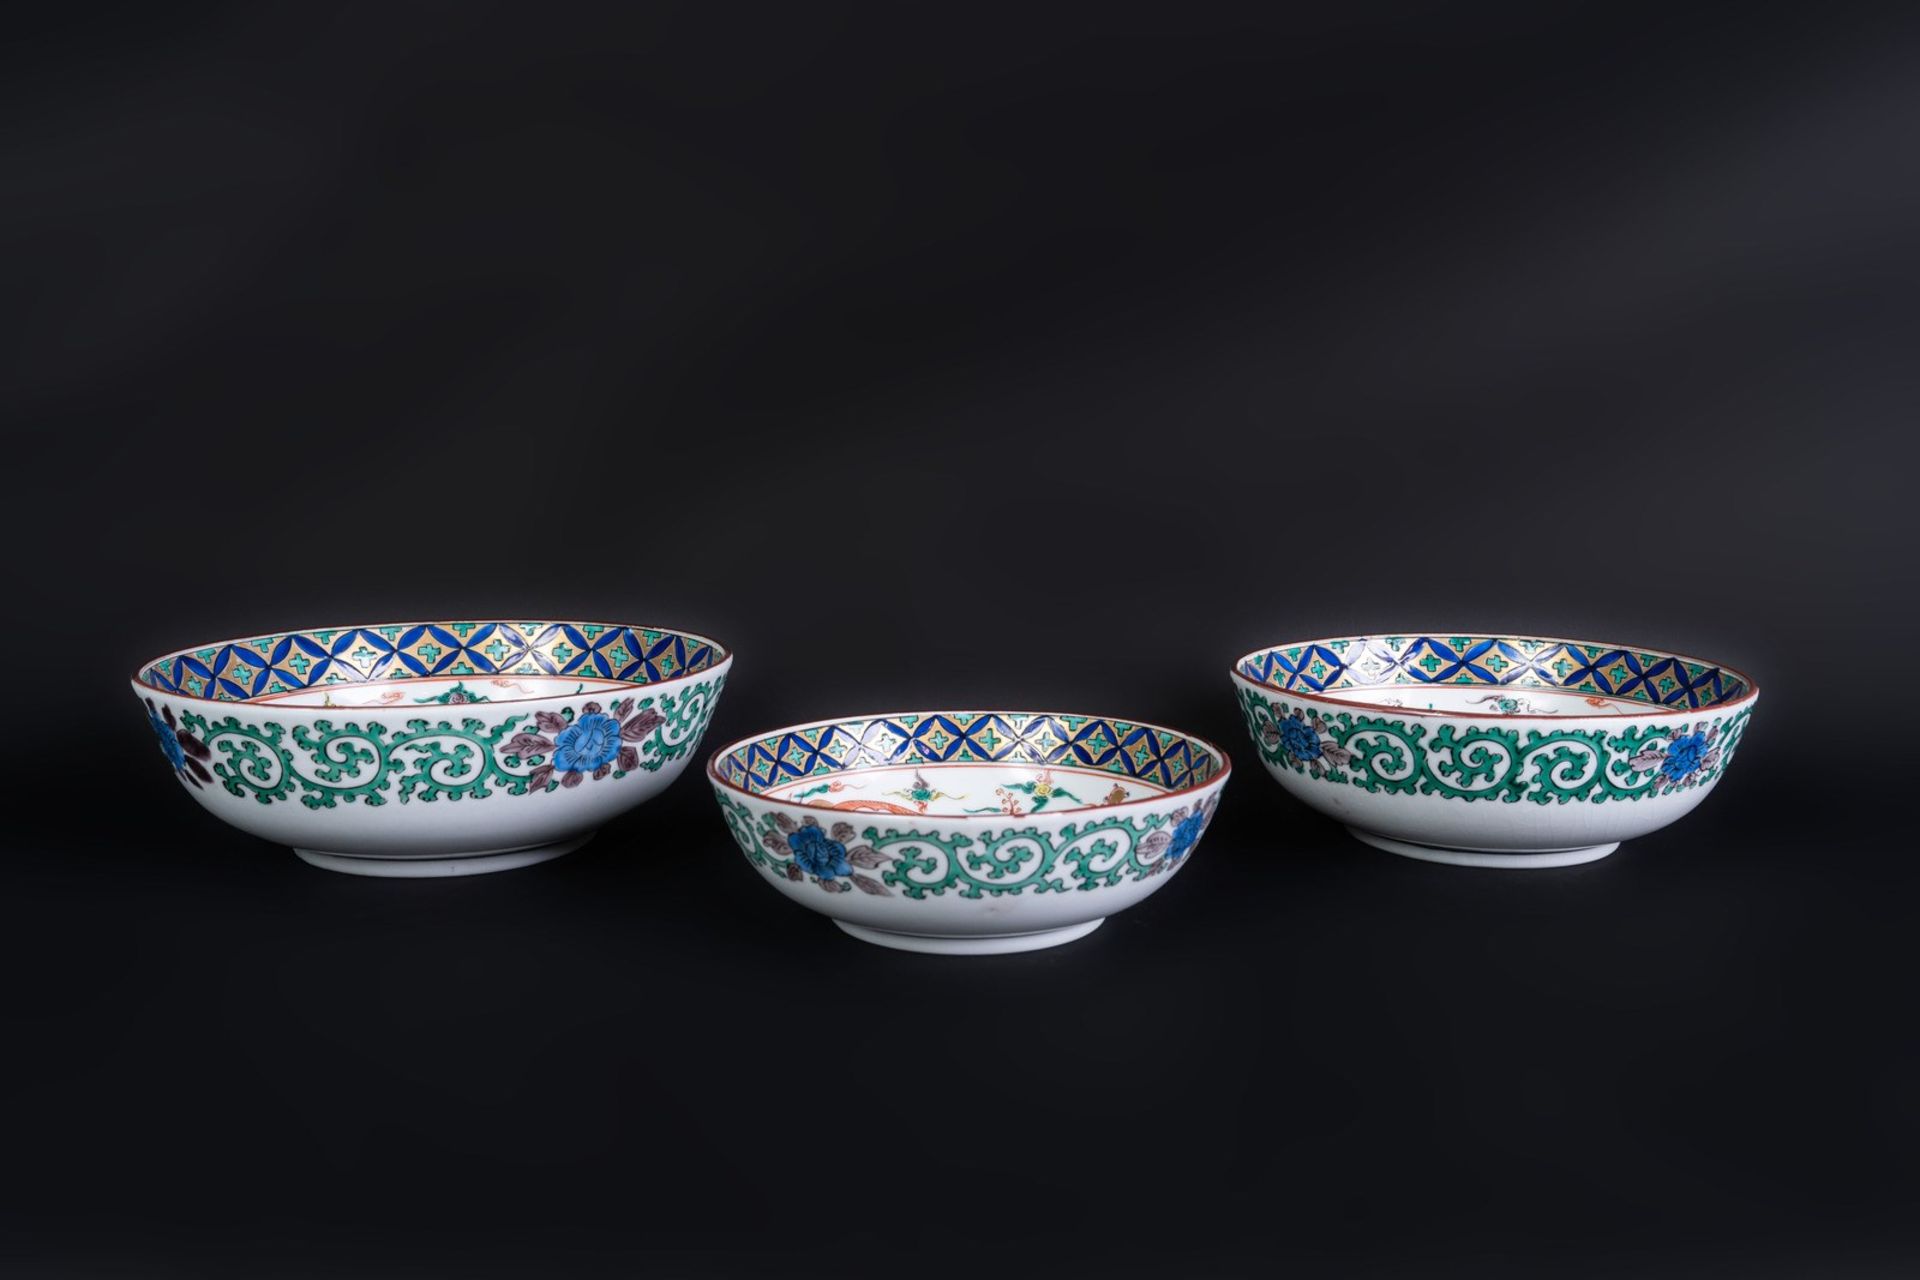 ARTE GIAPPONESE Three Imari pottery bowls decorated with phoenixesJapan, 19th-20th century .